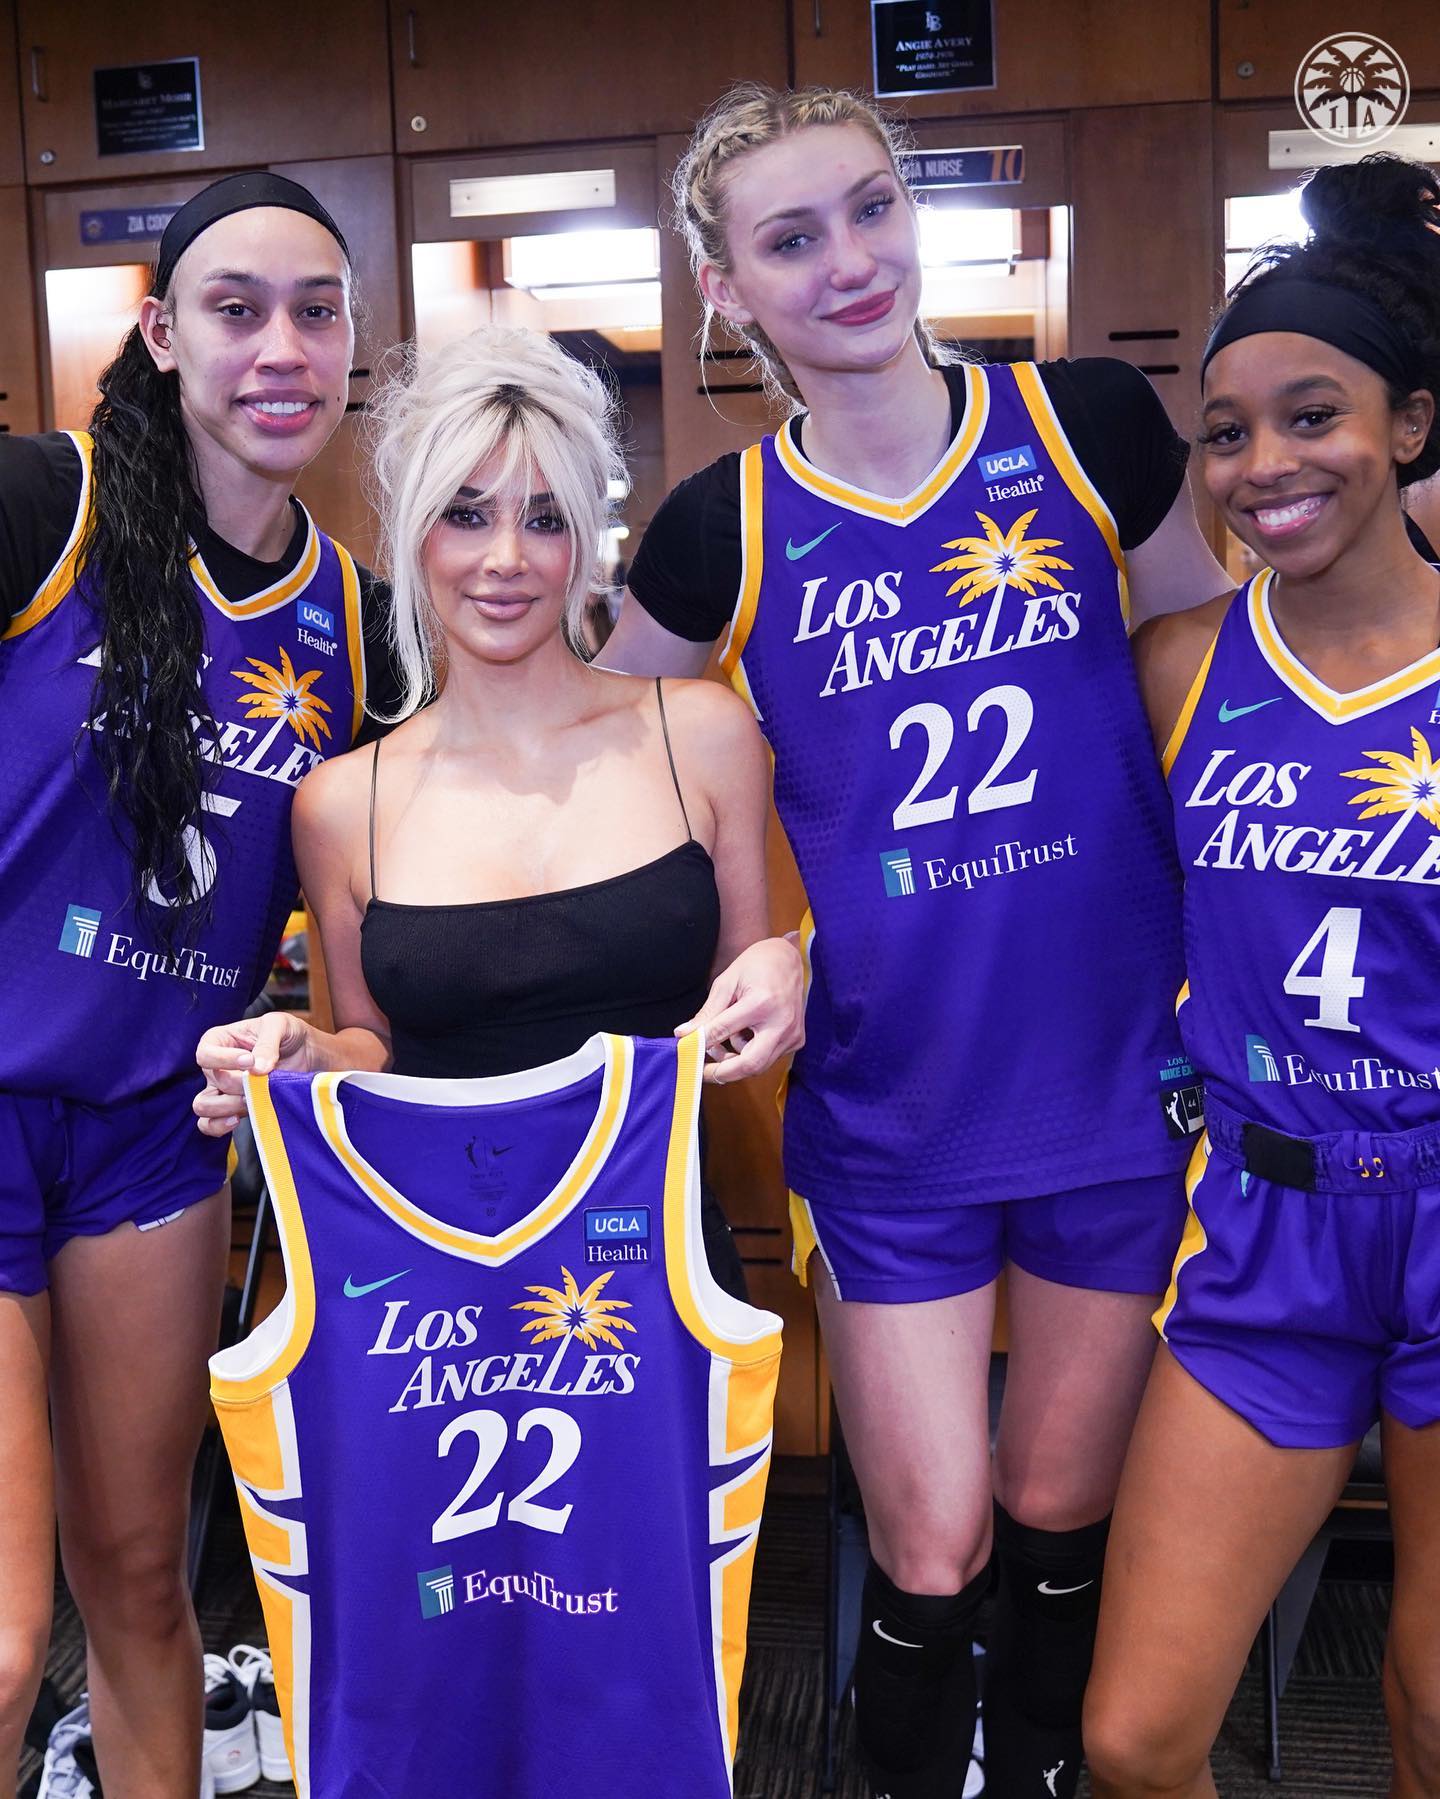 Kim showed off her basketball jersey while posing with the other LA Sparks players